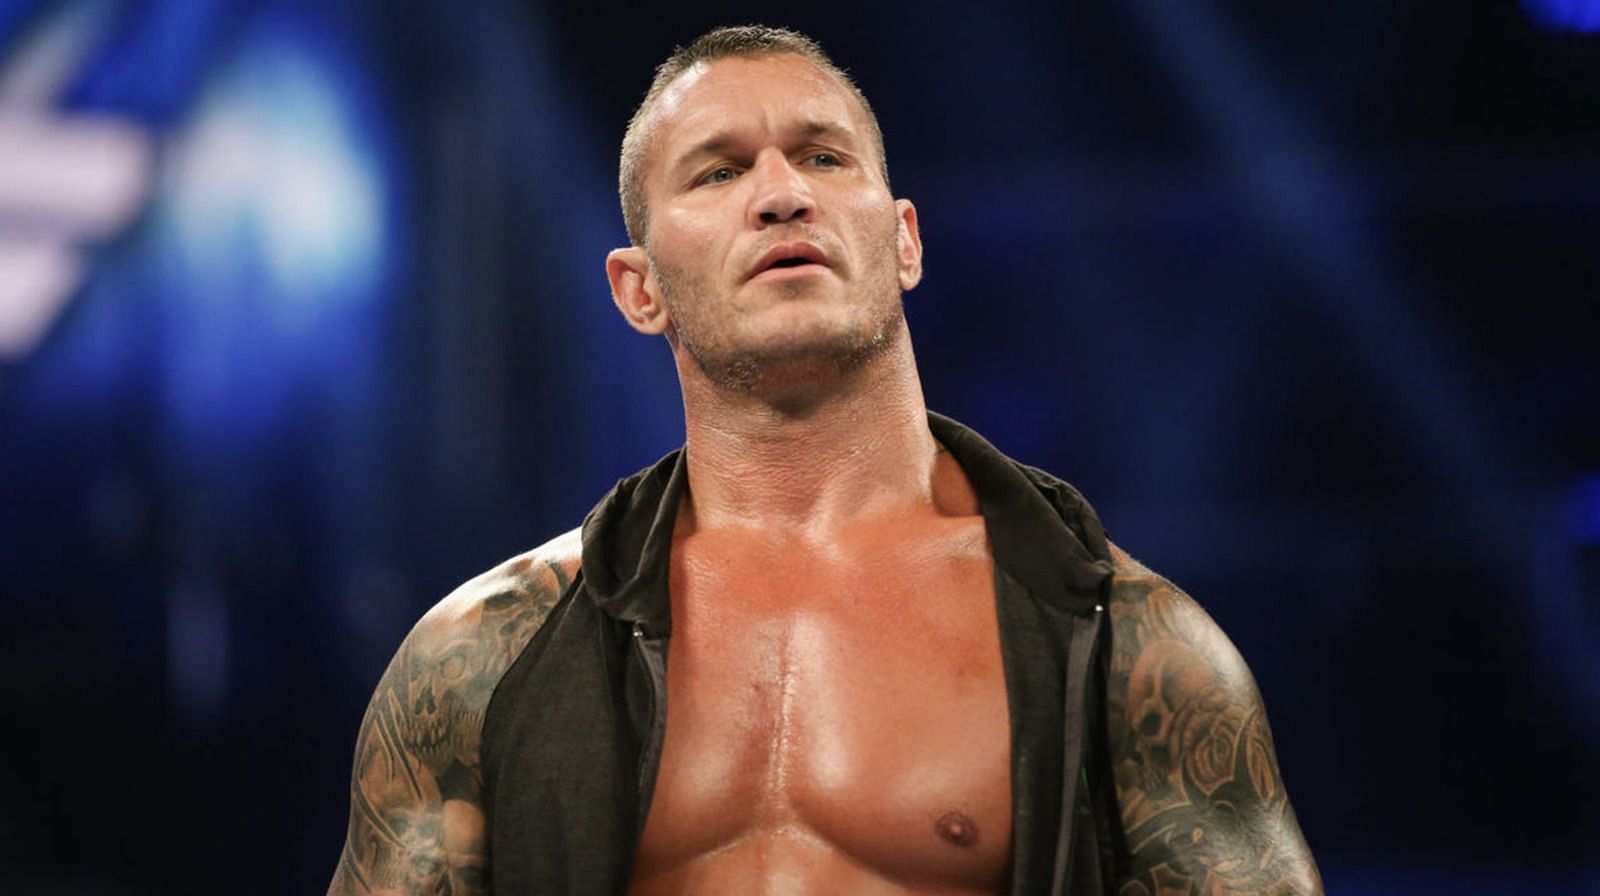 Randy Orton was spotted at the WWE PC